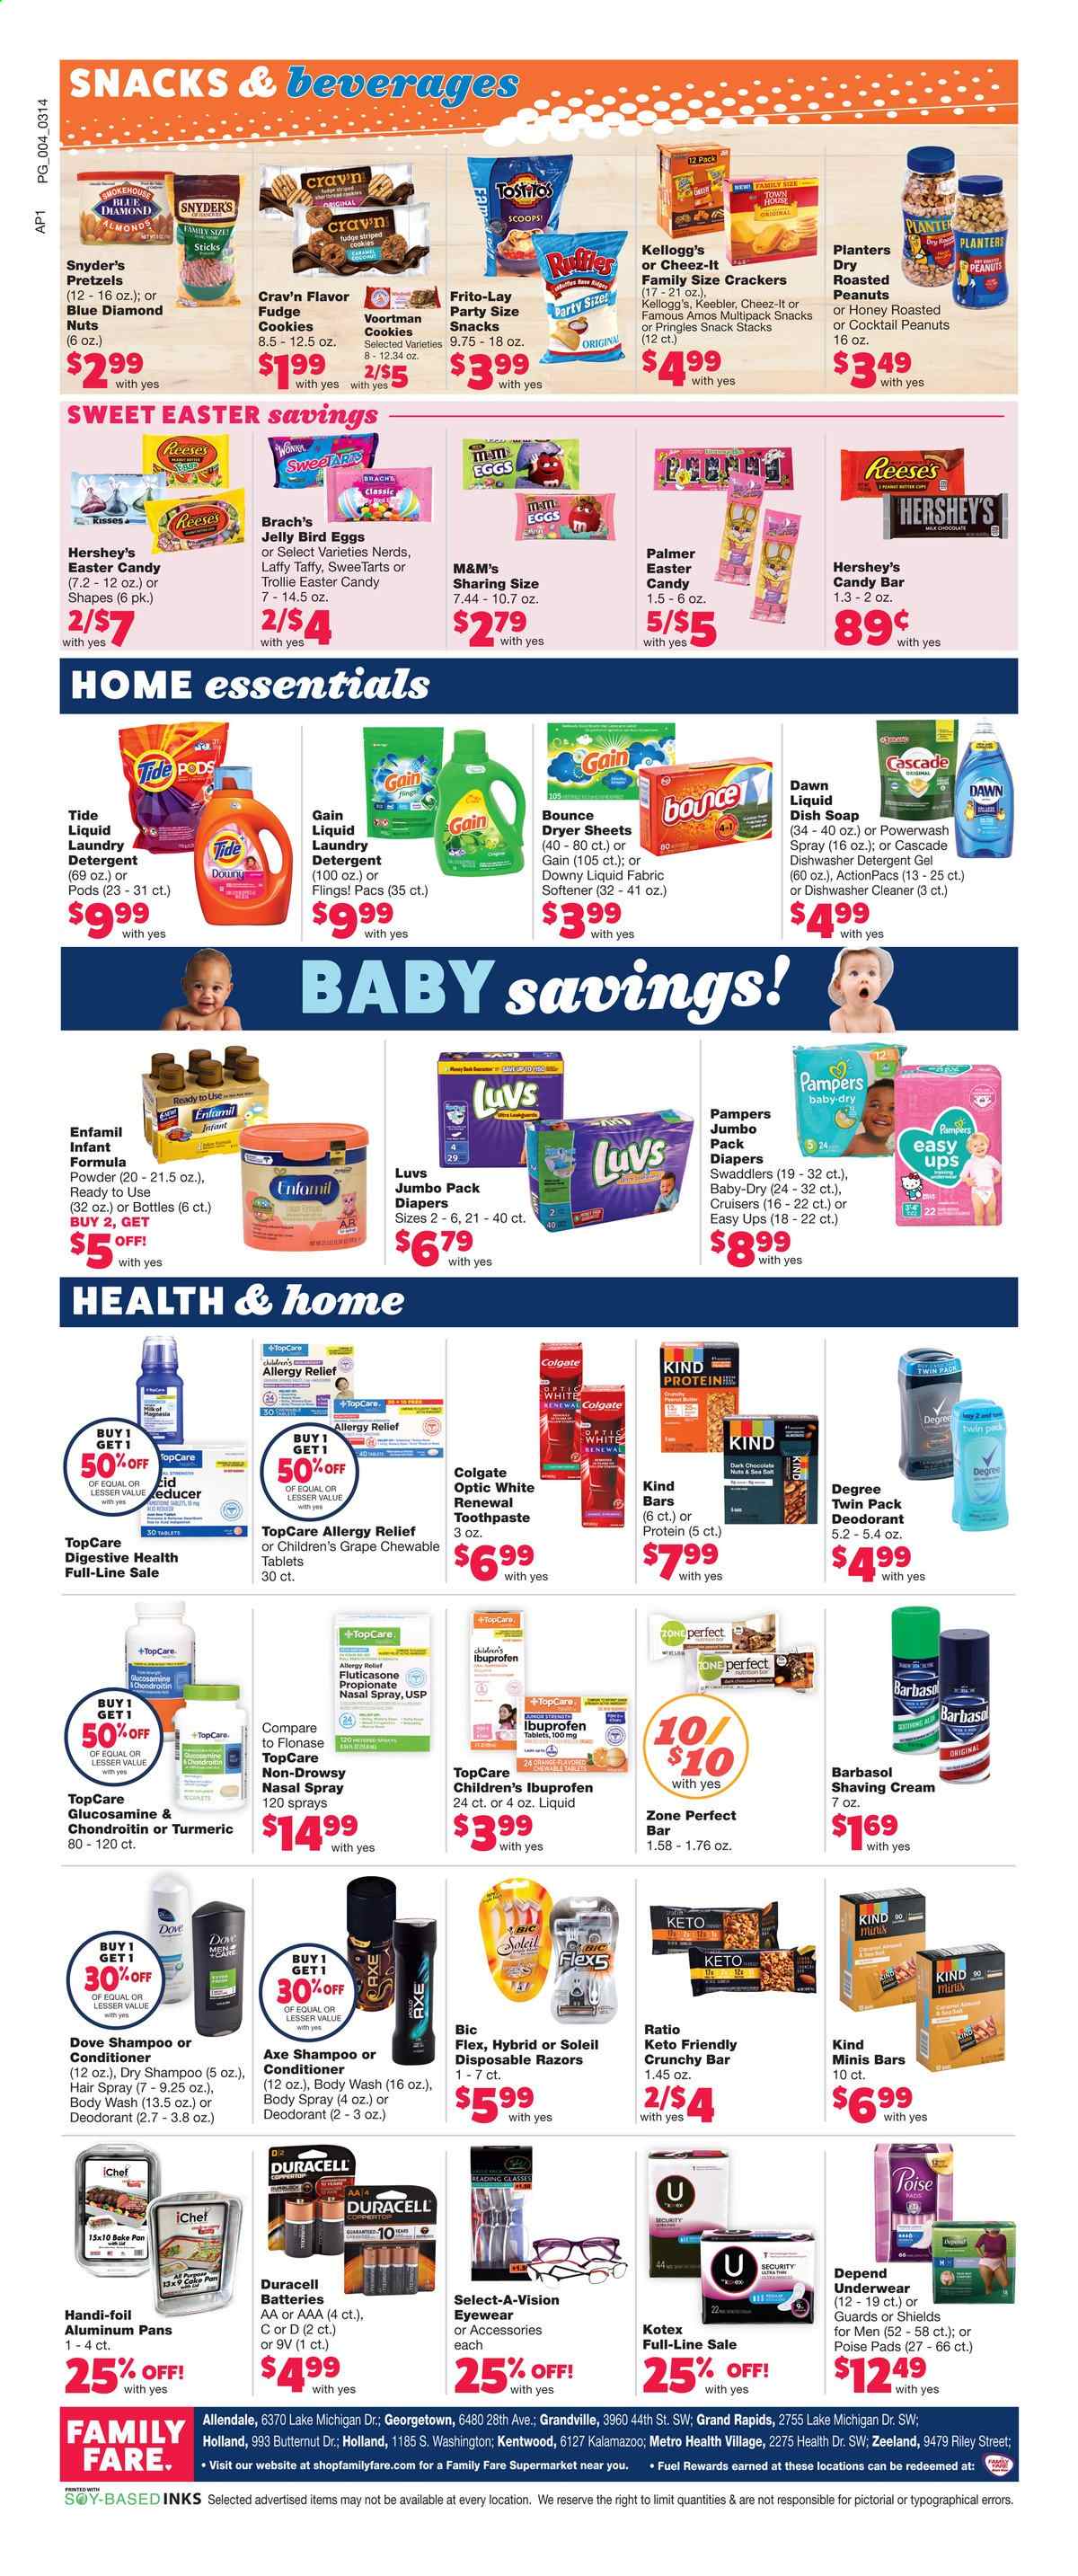 thumbnail - Family Fare Flyer - 03/14/2021 - 03/20/2021 - Sales products - pretzels, jelly, eggs, Reese's, Hershey's, cookies, fudge, chocolate, crackers, Kellogg's, dark chocolate, Digestive, Keebler, Pringles, snack, Frito-Lay, Cheez-It, Zone Perfect, turmeric, honey, almonds, roasted peanuts, peanuts, Planters, Blue Diamond, Coca-Cola, Enfamil, Pampers, Dove, detergent, Gain, cleaner, Cascade, Tide, fabric softener, laundry detergent, Bounce, washing gel, dryer sheets, dishwashing liquid, dishwasher cleaner, body wash, shampoo, soap, Colgate, toothpaste, Kotex, conditioner, body spray, anti-perspirant, deodorant, BIC, Barbasol, disposable razor, pan, battery, Duracell, glucosamine, Ibuprofen, nasal spray, allergy relief. Page 4.